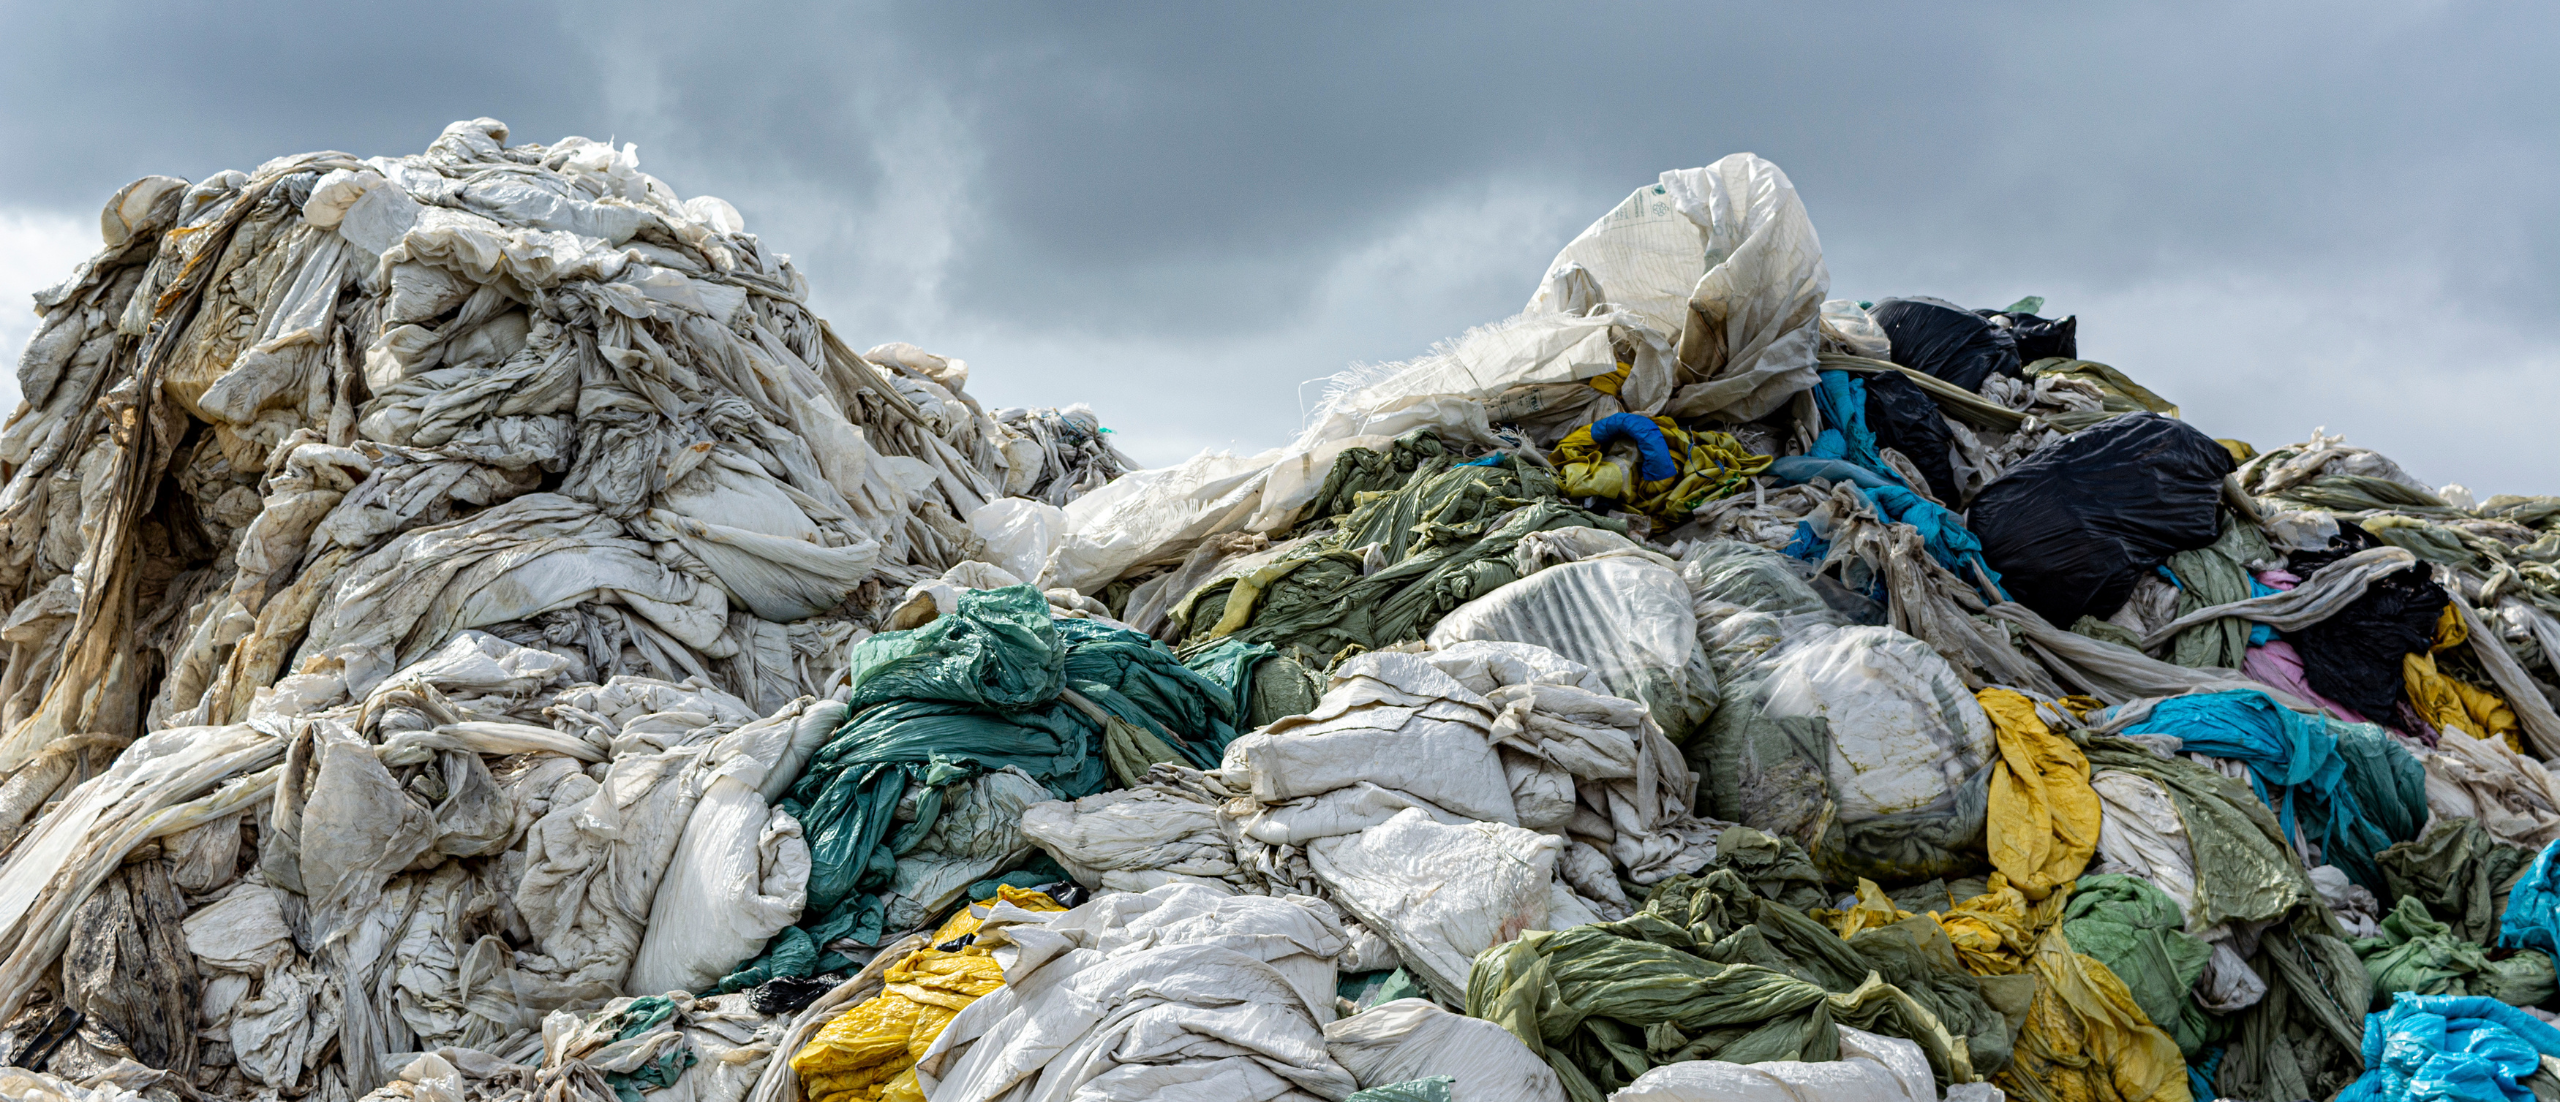 Photo of landfill pile full of textiles and clothing.